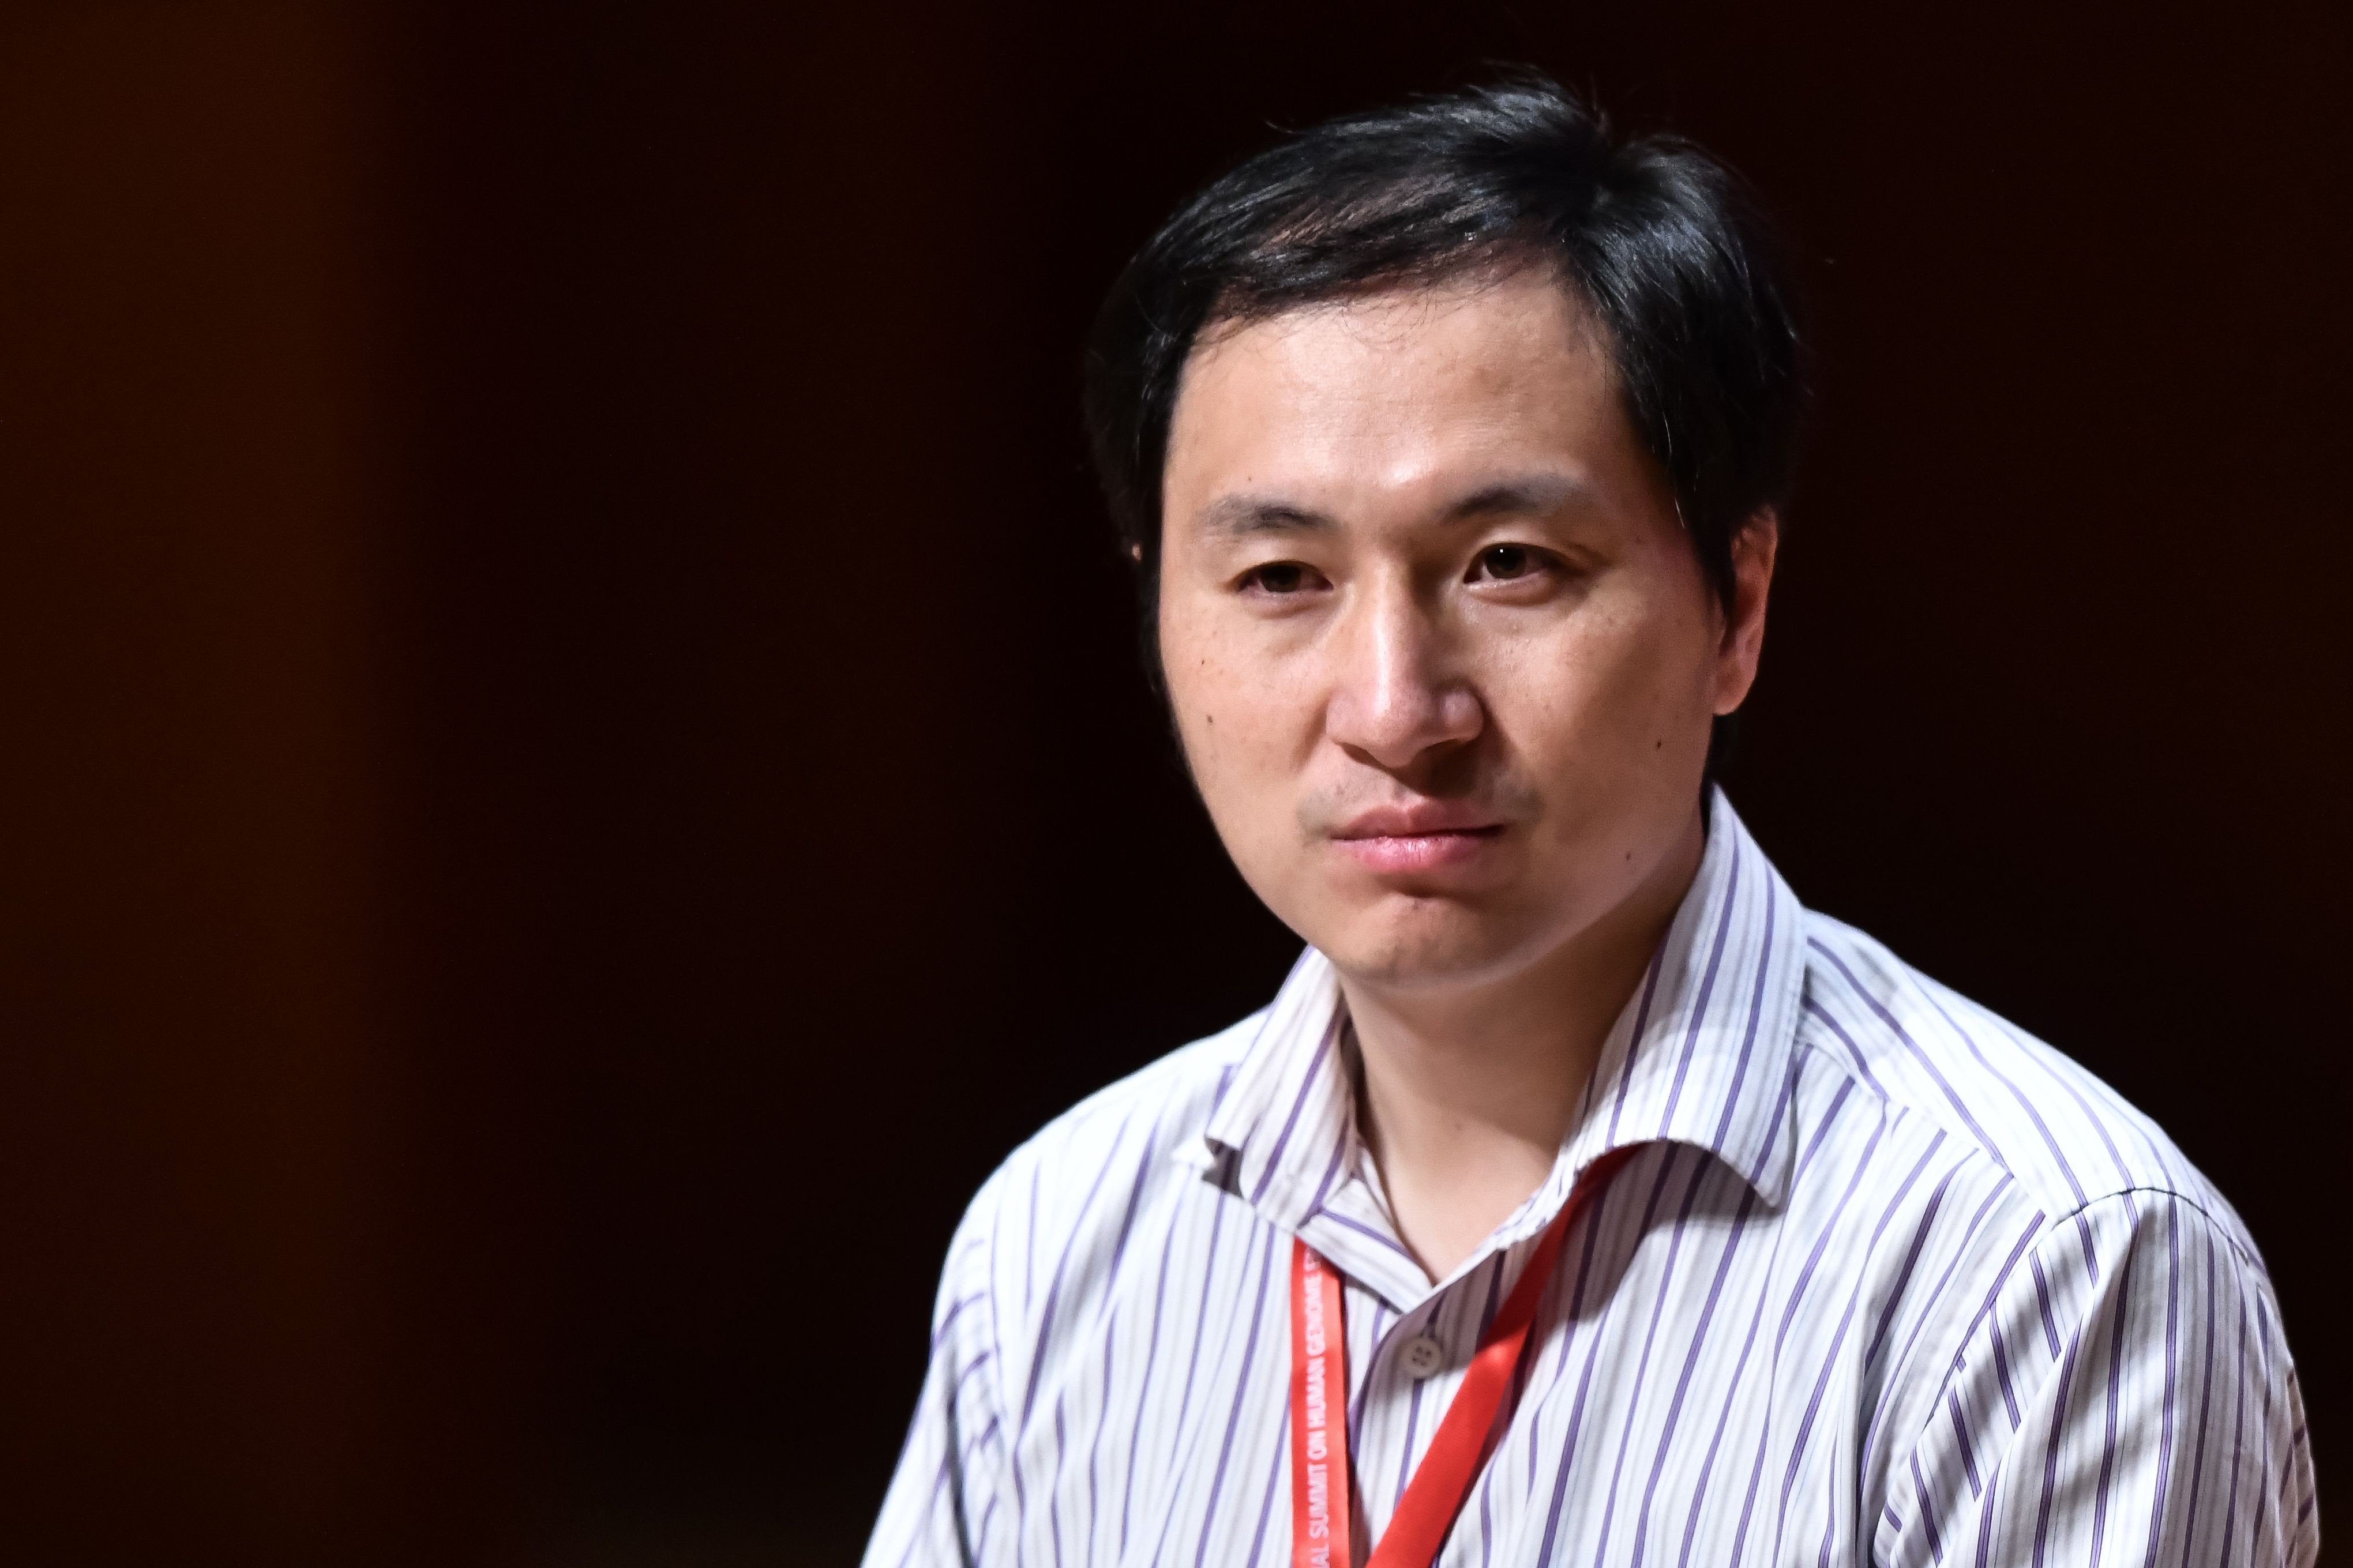 Chinese scientist He Jiankui made claims of a medical breakthrough that could control the HIV epidemic. Photo: AFP